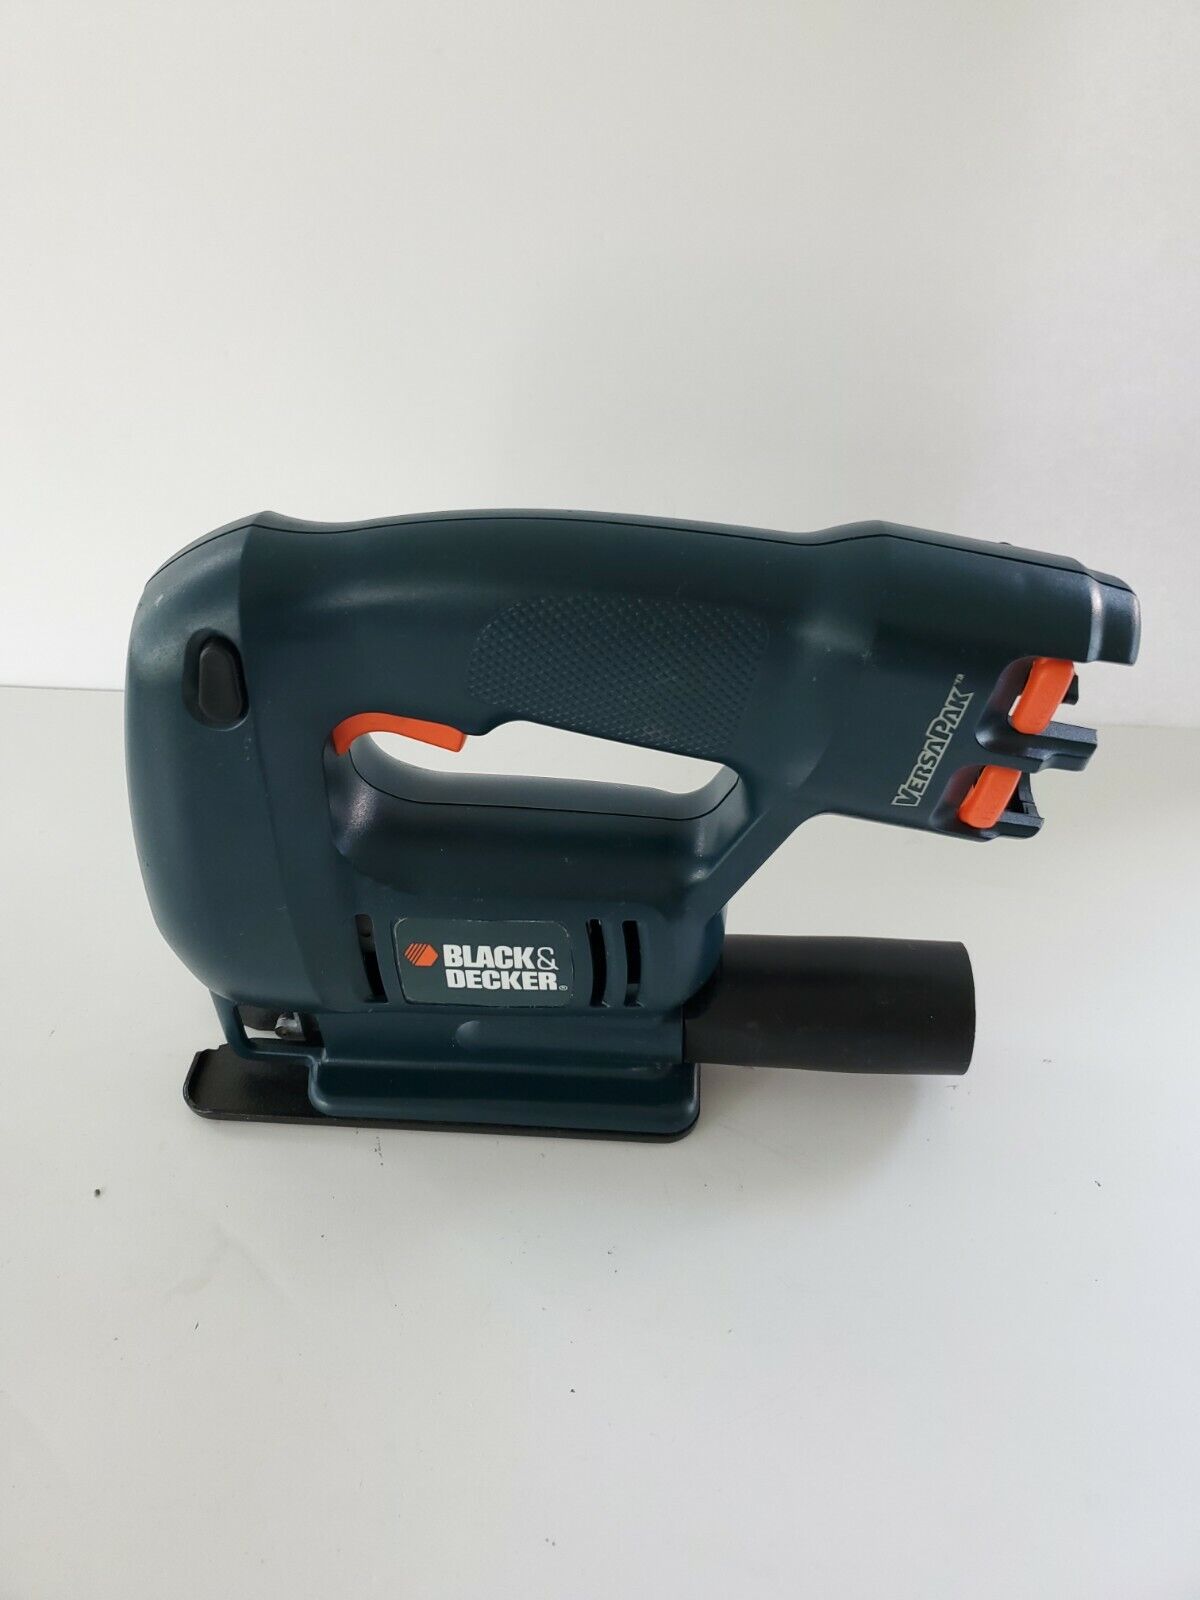 BLACK & DECKER VP660 Cordless Jig Saw, Tool Only Great condition